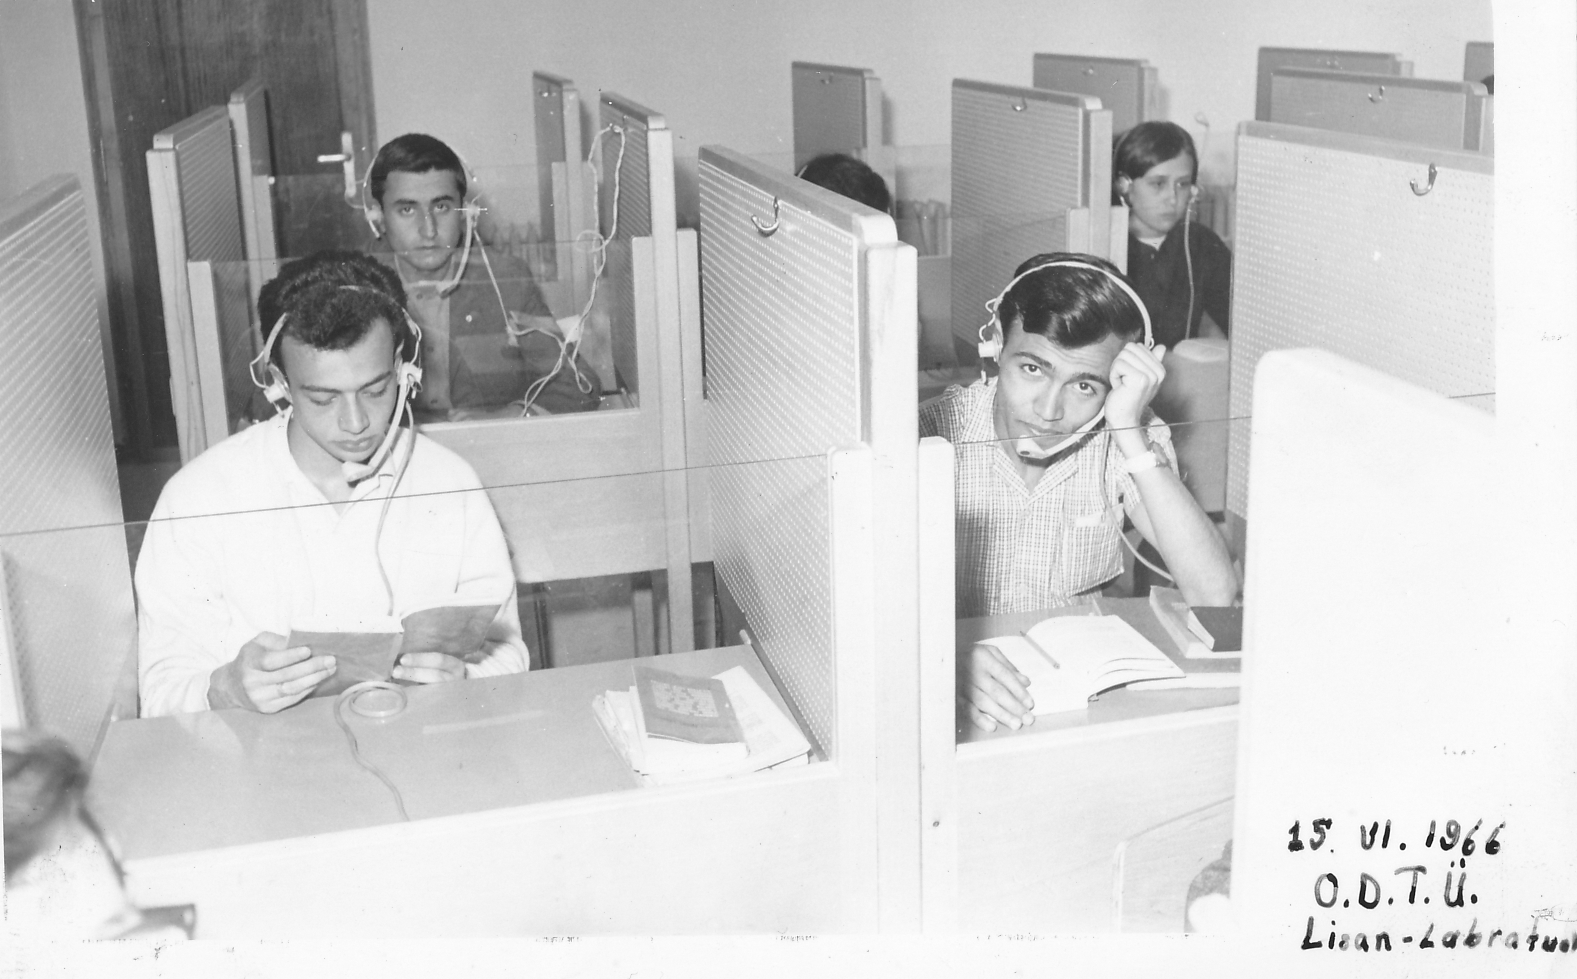 Students in the preparatory class listening laboratory, 1966